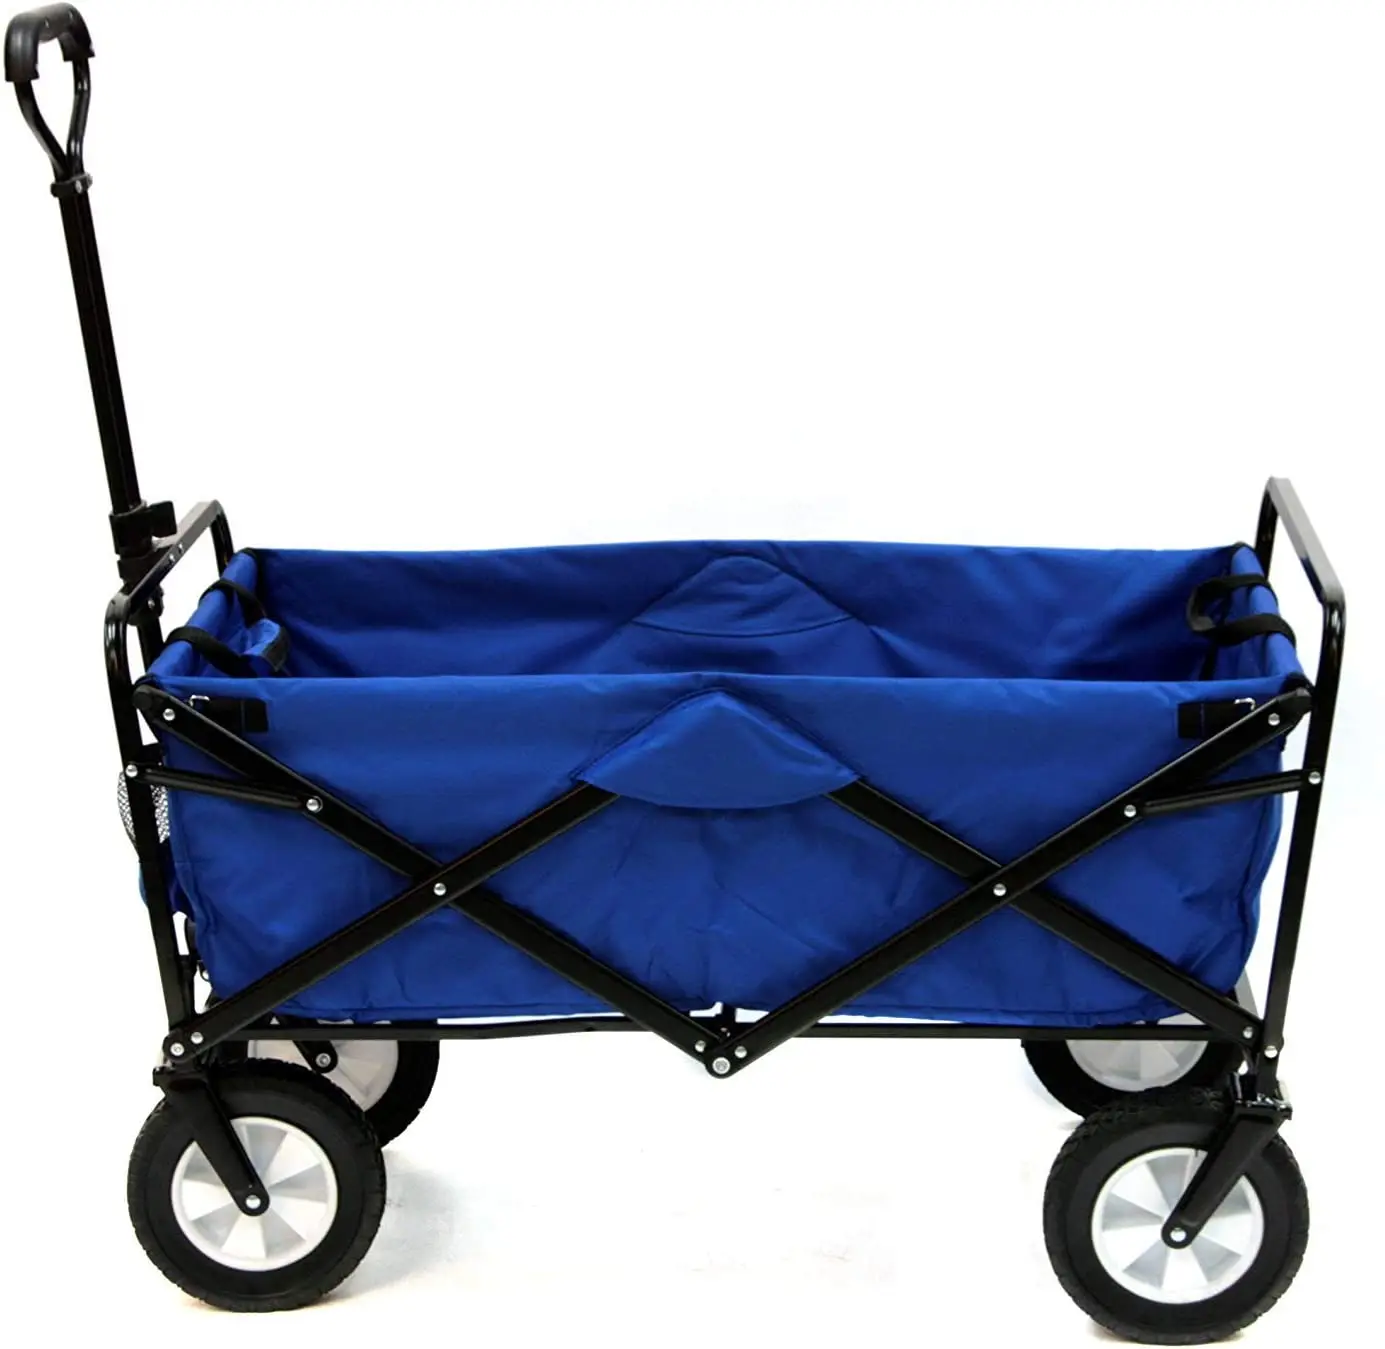 
In Stock.Outdoor foldable wagon 4 Wheels Collapsible Utility Cart Portable Storage Basket Garden Beach Trolley 